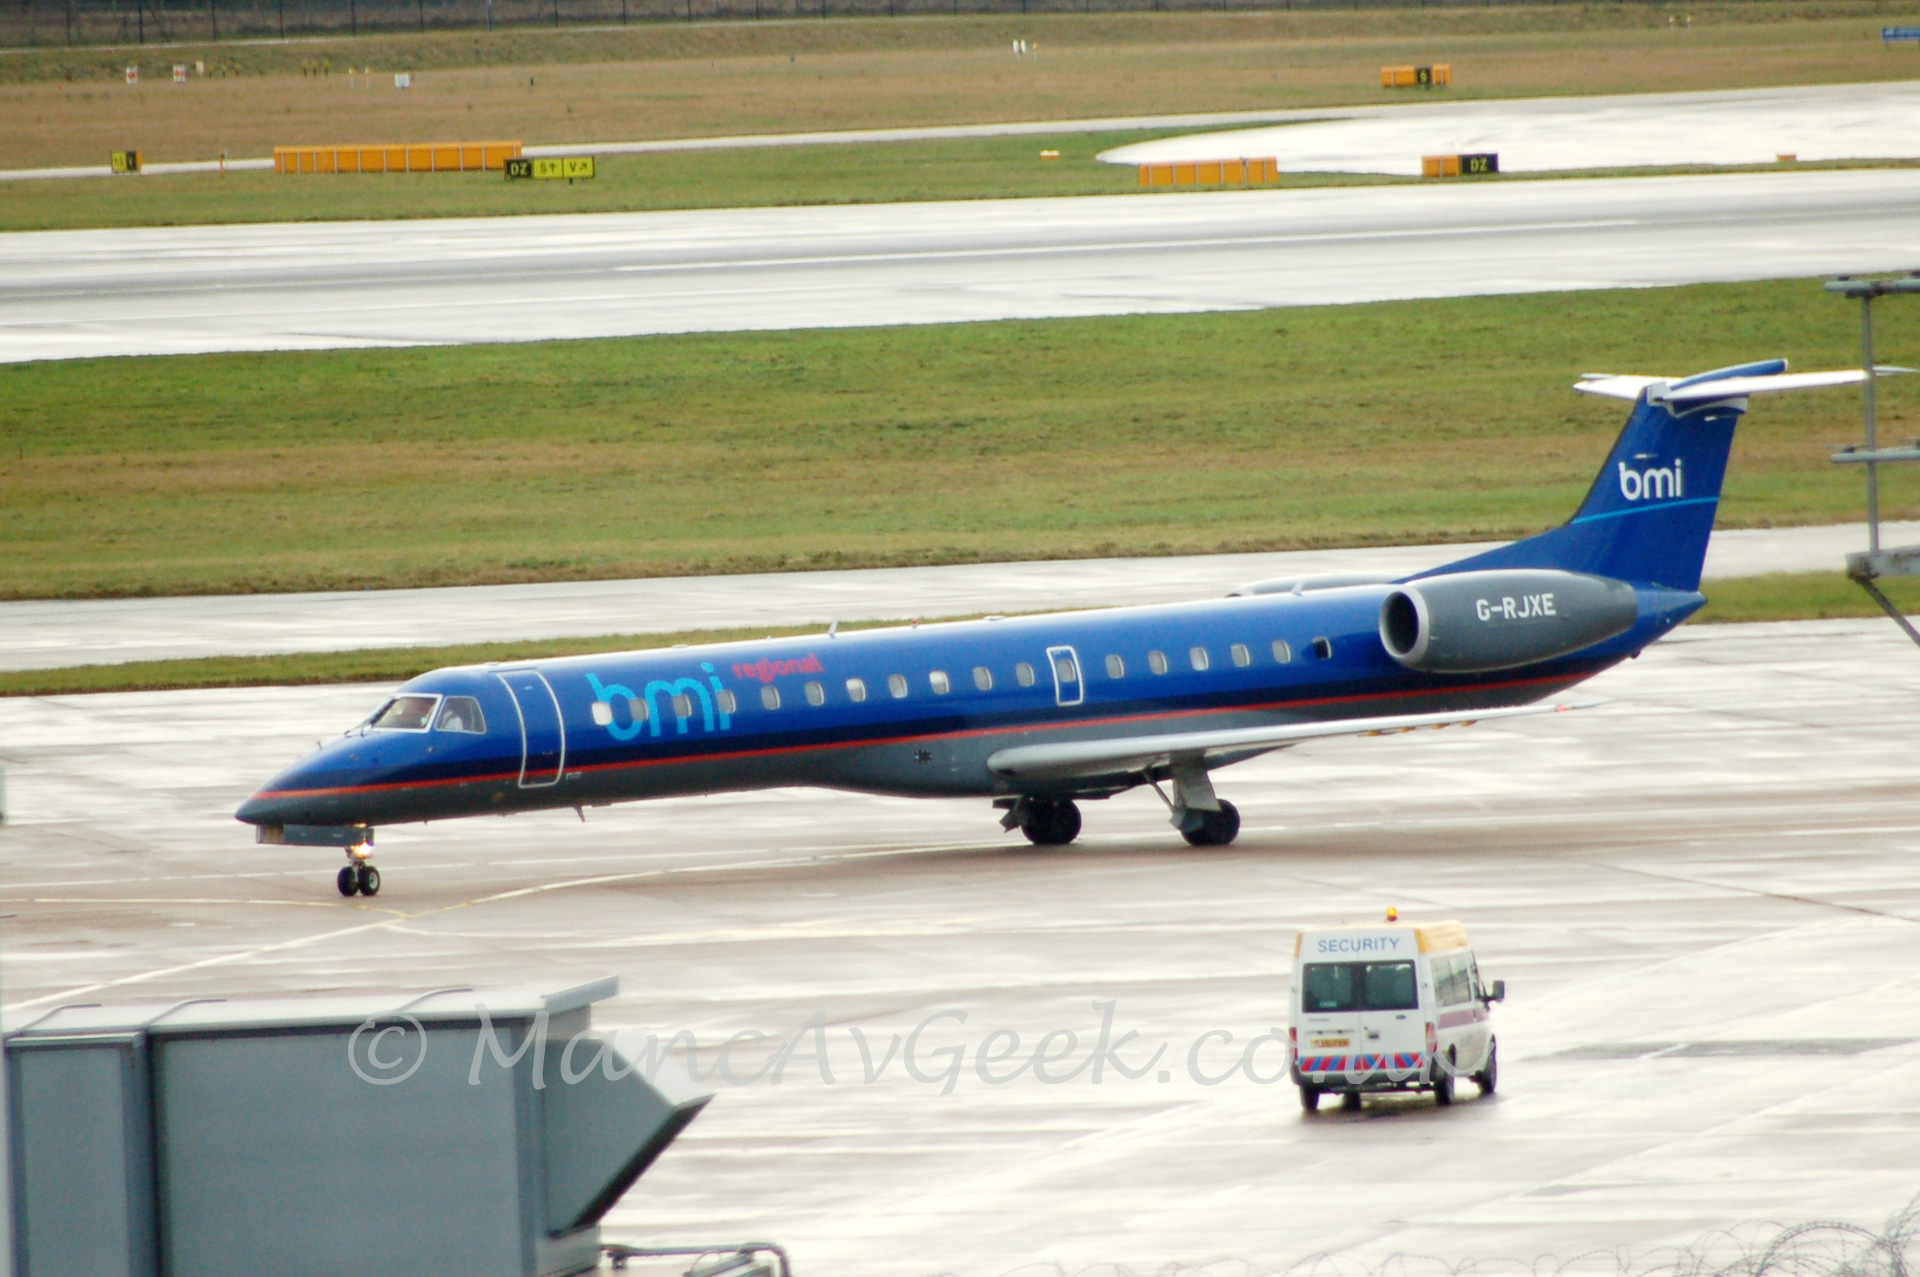 Side view of a twin engined jet airliner taxiing from right to left. The plane is mostly dark blue, with a dark grey belly, seperated by a thin red stripe. There are large, light blue "bmi" titles, followed by smaller red "regional" titles on the upper forward fuselage. The engines are grey, with the registration G-RJXE in white, attached to the side of the rear fuselage. The tail is the same dark blue, with a light blue stripe below white "bmi" titles. In the foreground there is a large grey ventilation ducting on the lower left of the frame, with a white van with "security" titles on the upper part of the rear doors. In the background, alternating stretches of grass and tarmac stretch off into the distance.